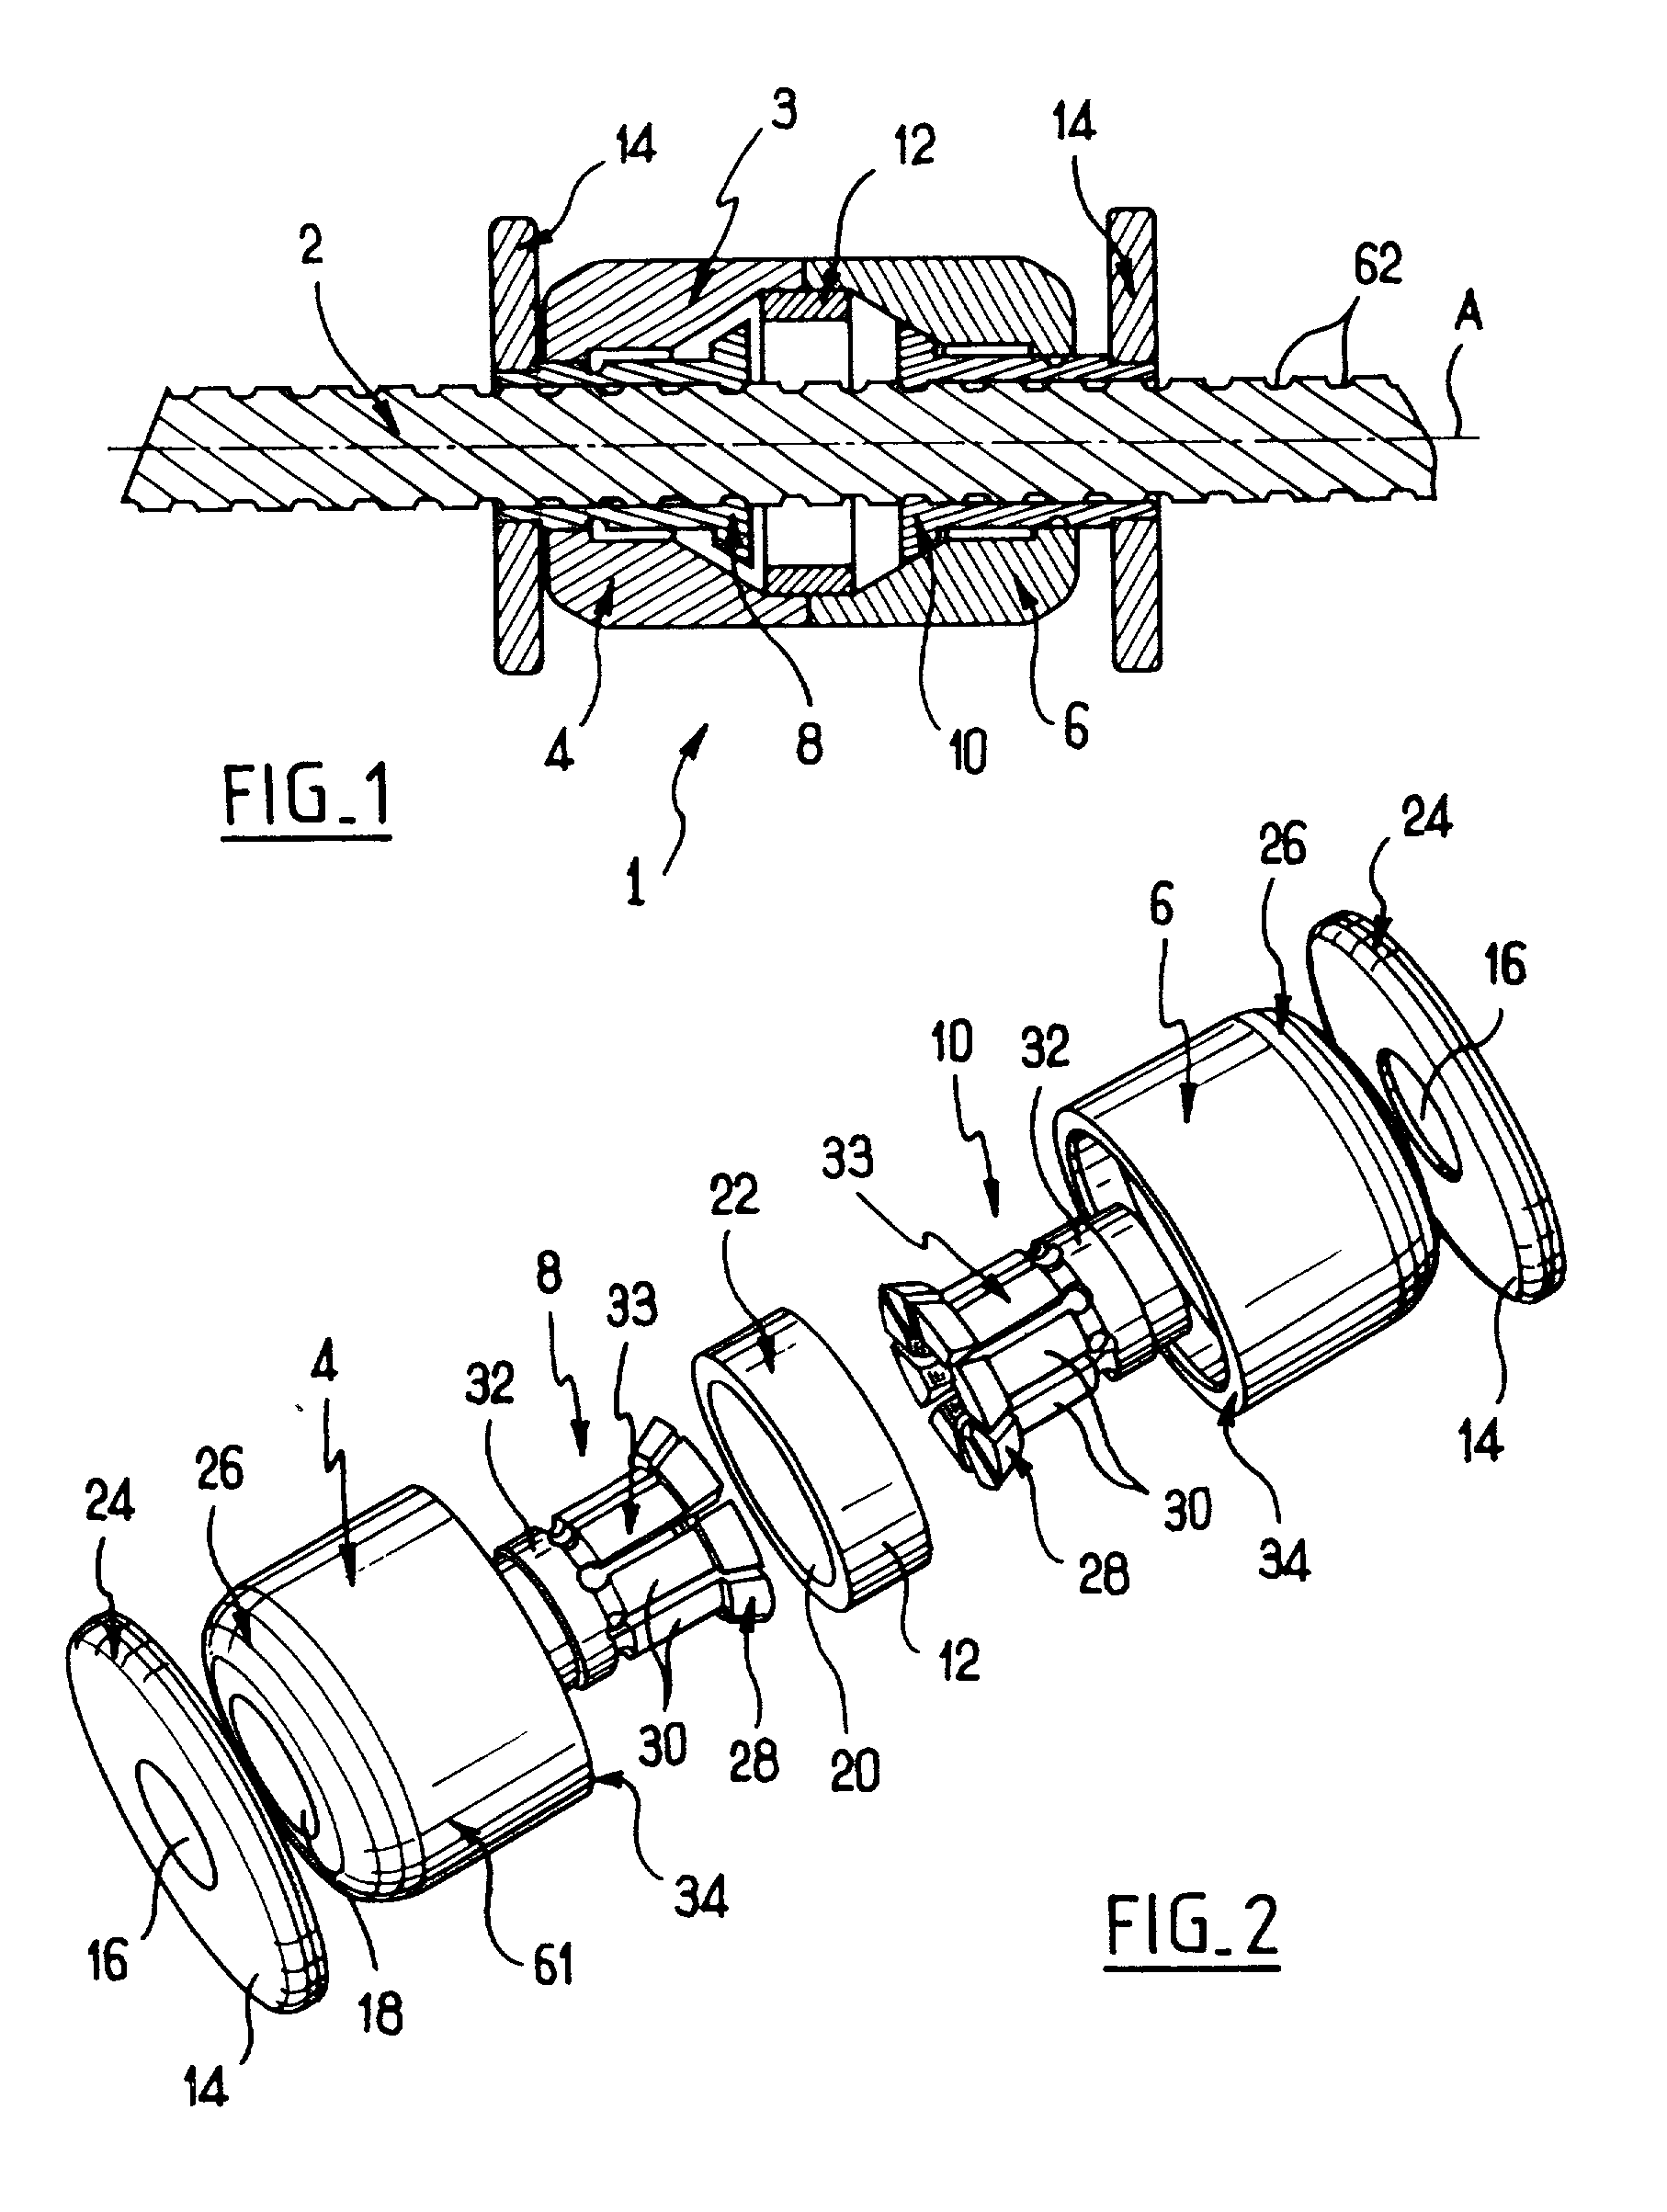 Position-adjustment system for an instrument for surgery of the spine